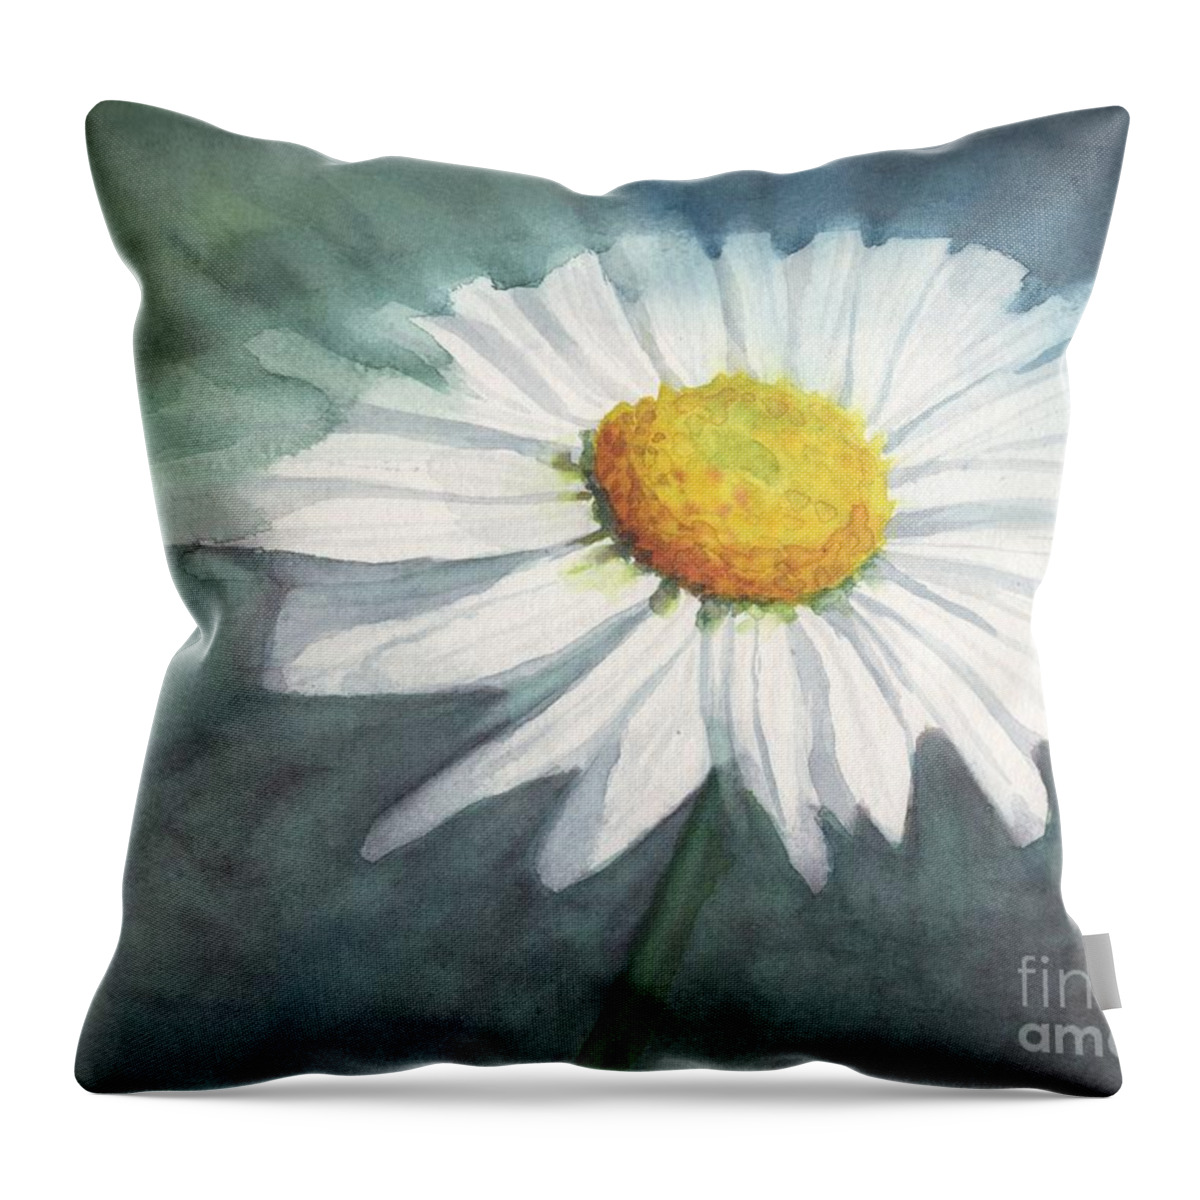 Daisy Throw Pillow featuring the painting Daisy by Vicki B Littell